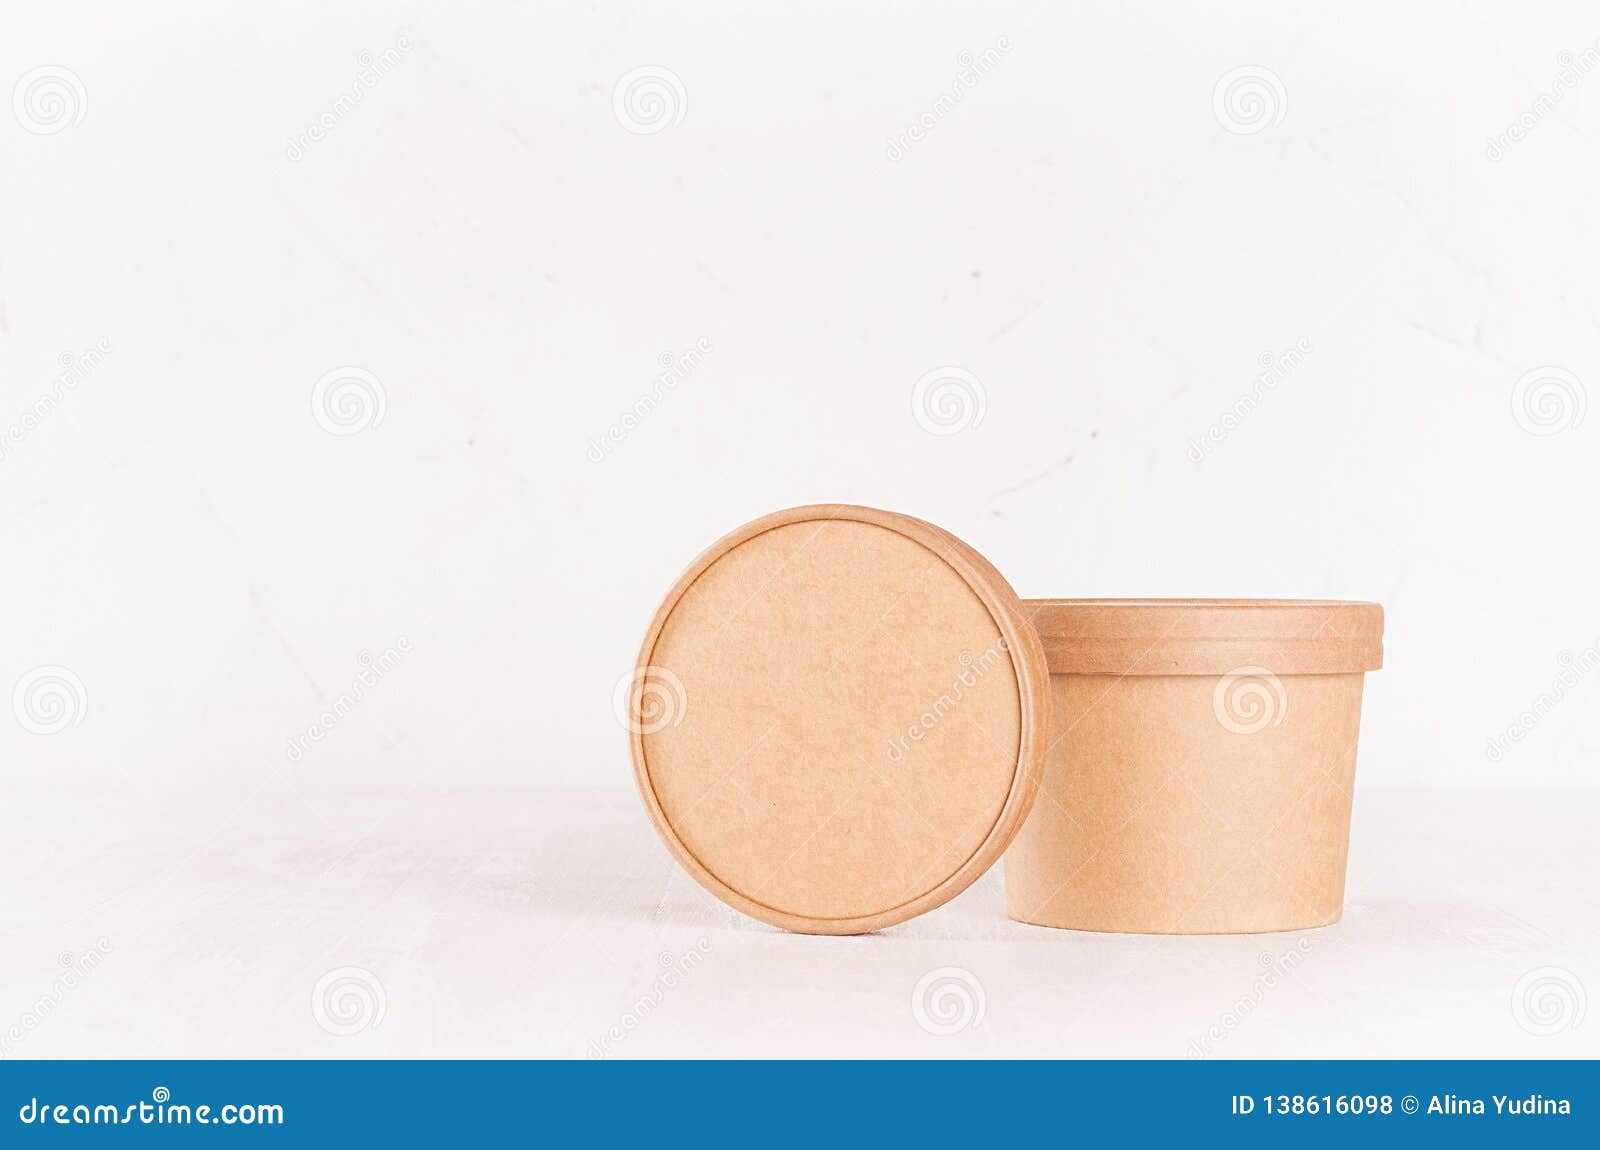 Download Blank Brown Paper Bowl And Cap For Food Takeaway On Solf ...